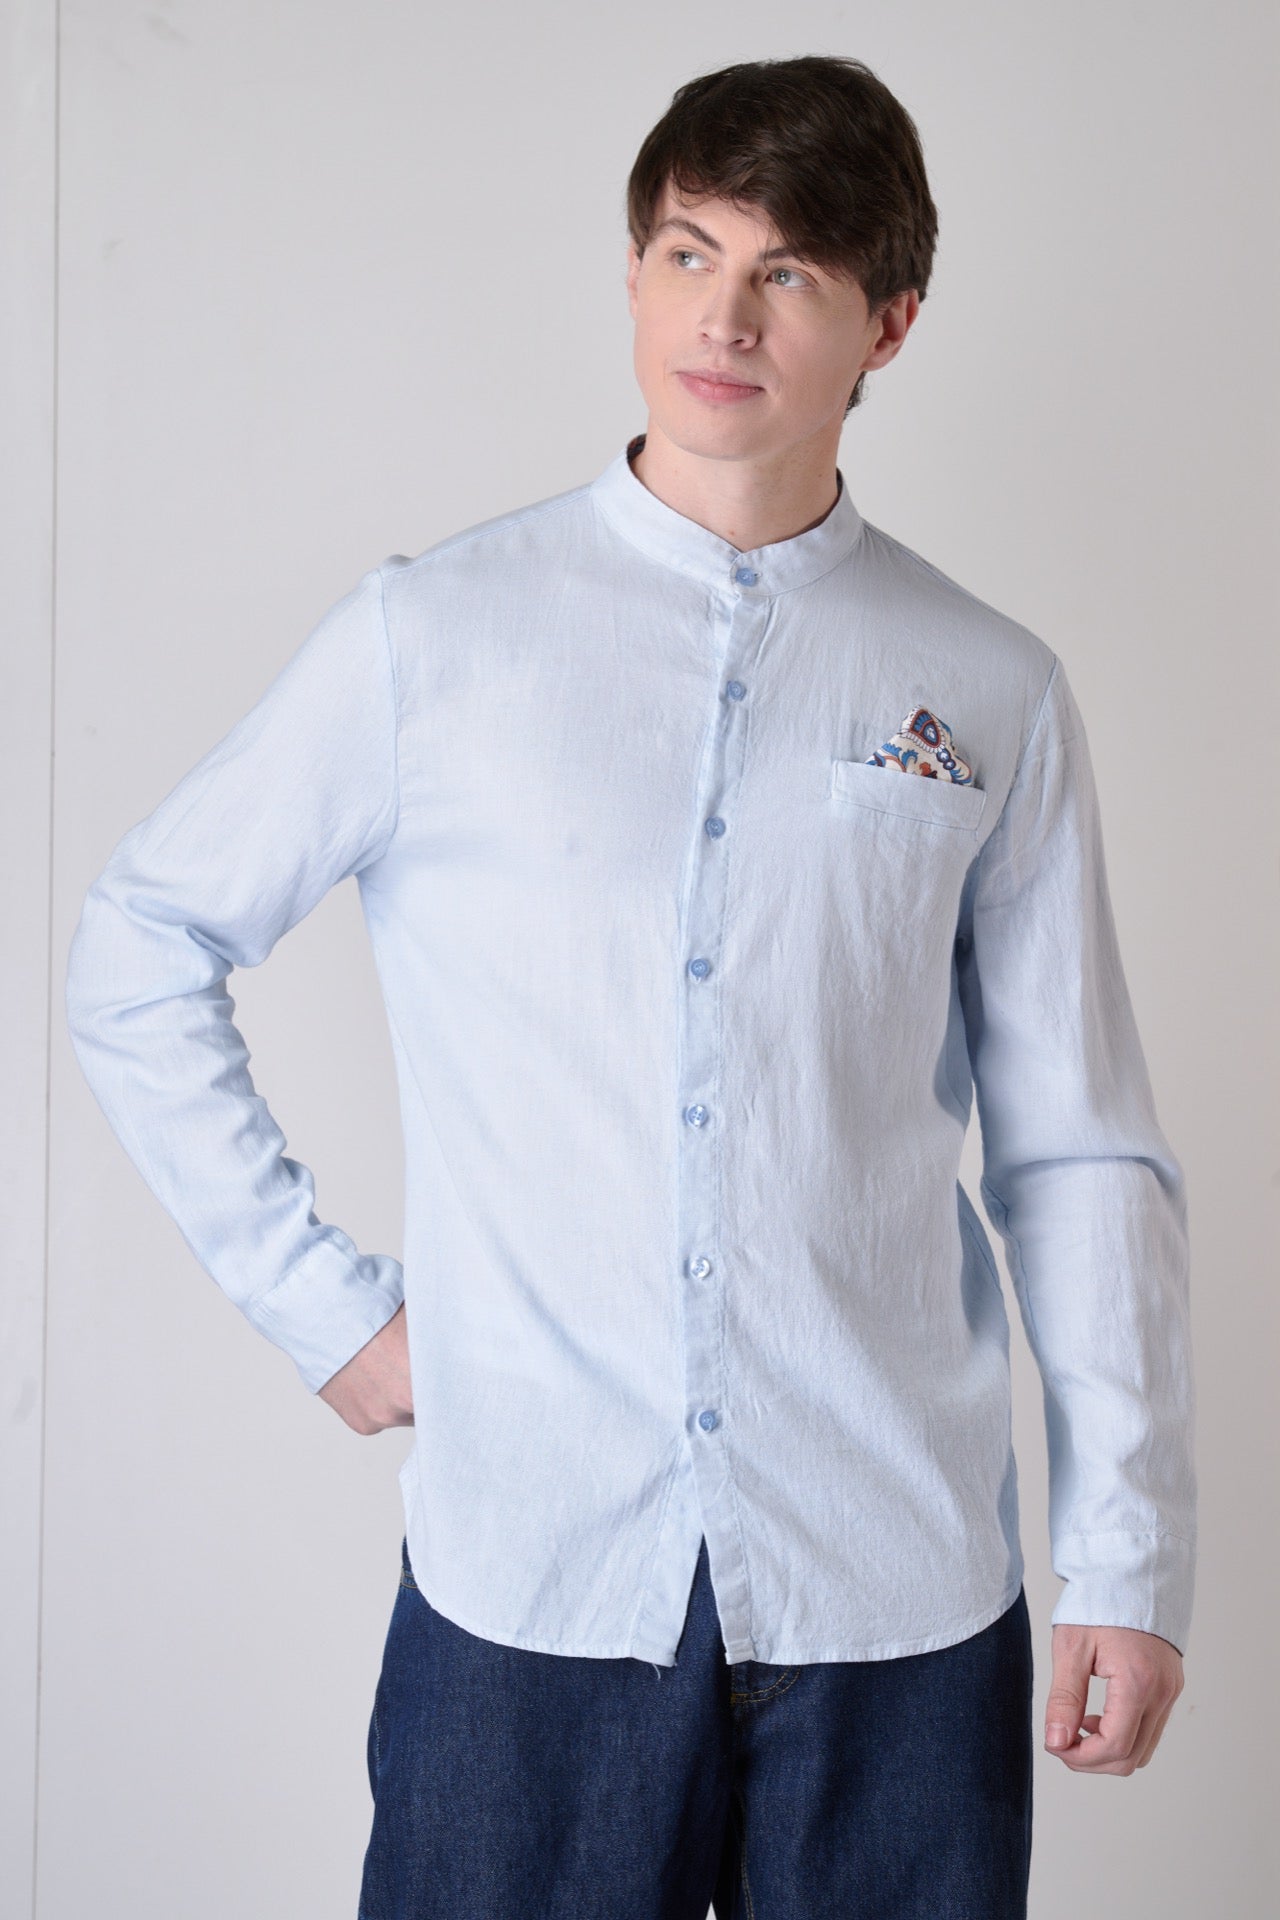 Korean Tailored Shirt in Light Blue Linen with Pocket Square, Interior and Cuffs in V2 Fabric